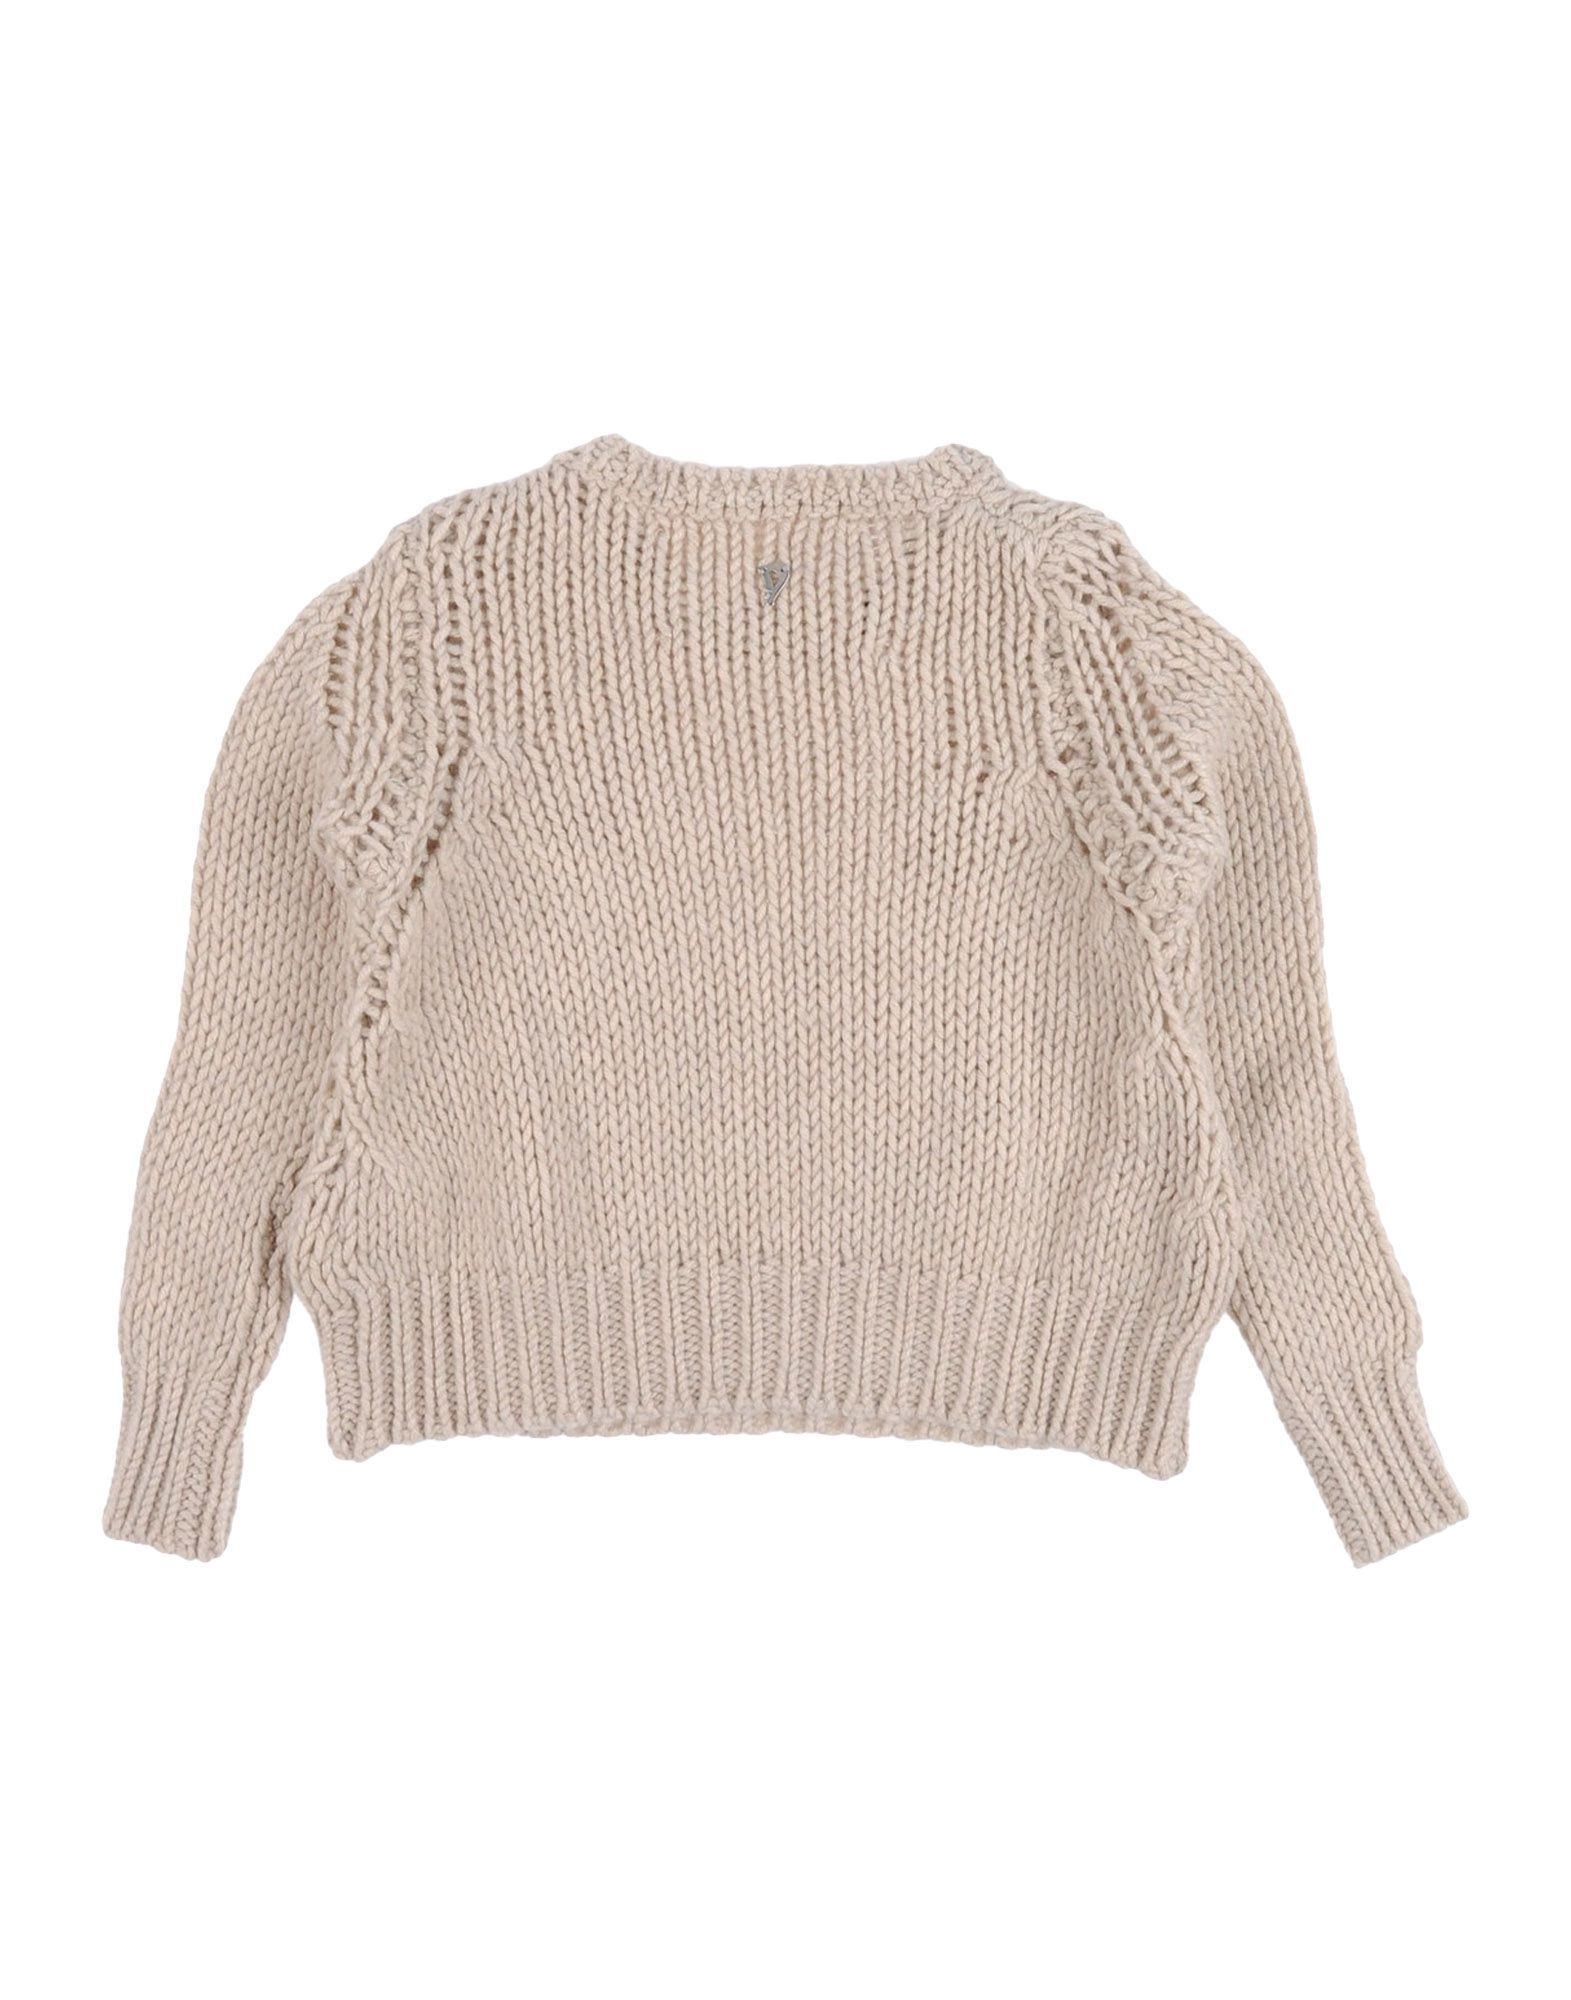 knitted, no appliqu�s, cable stitch, basic solid colour, round collar, medium-weight knitted, long sleeves, no pockets, hand wash, dry cleanable, iron at 110� c max, do not bleach, do not tumble dry